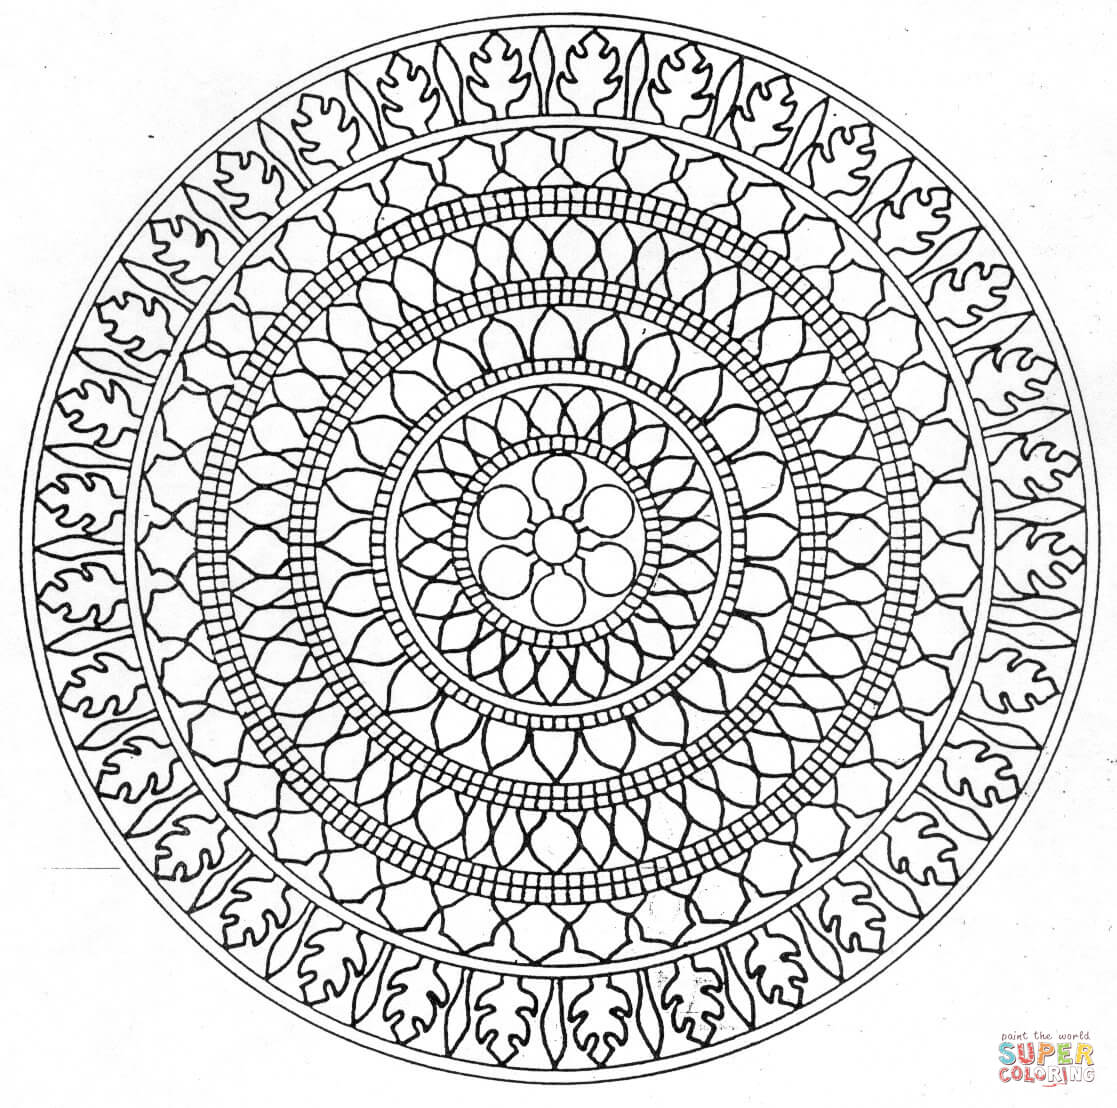 Mandala Stress Relieving Coloring: 50 Graphic Design and Stress Relieving  Patterns for Anger Release, Adult Relaxation, Coloring Meditation, Broader  I (Paperback)